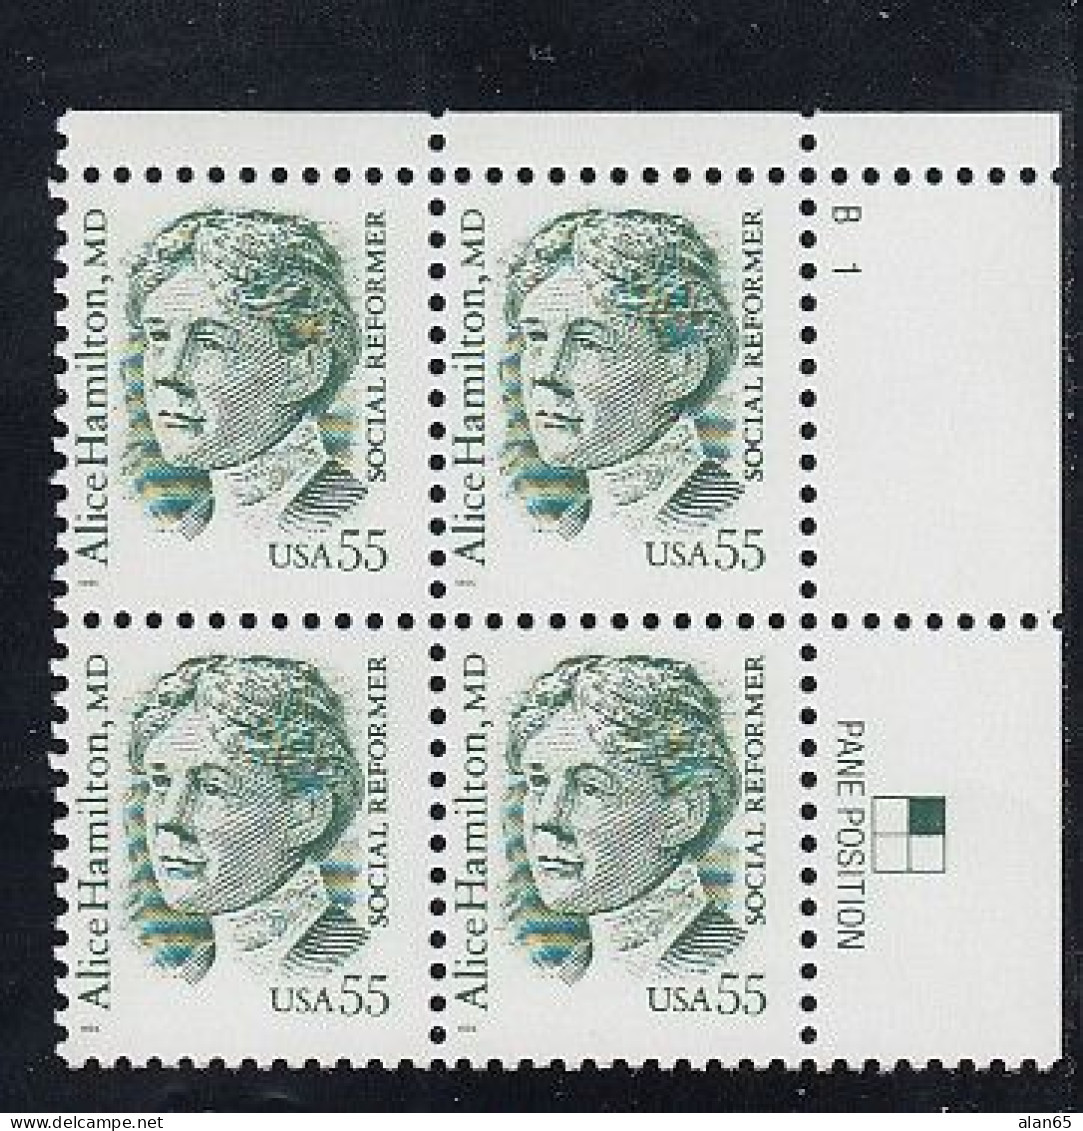 Sc#2940, Alice Hamilton MD Great American Series 1999 Issue 55-cent Stamp Plate # Block Of 4 - Plate Blocks & Sheetlets